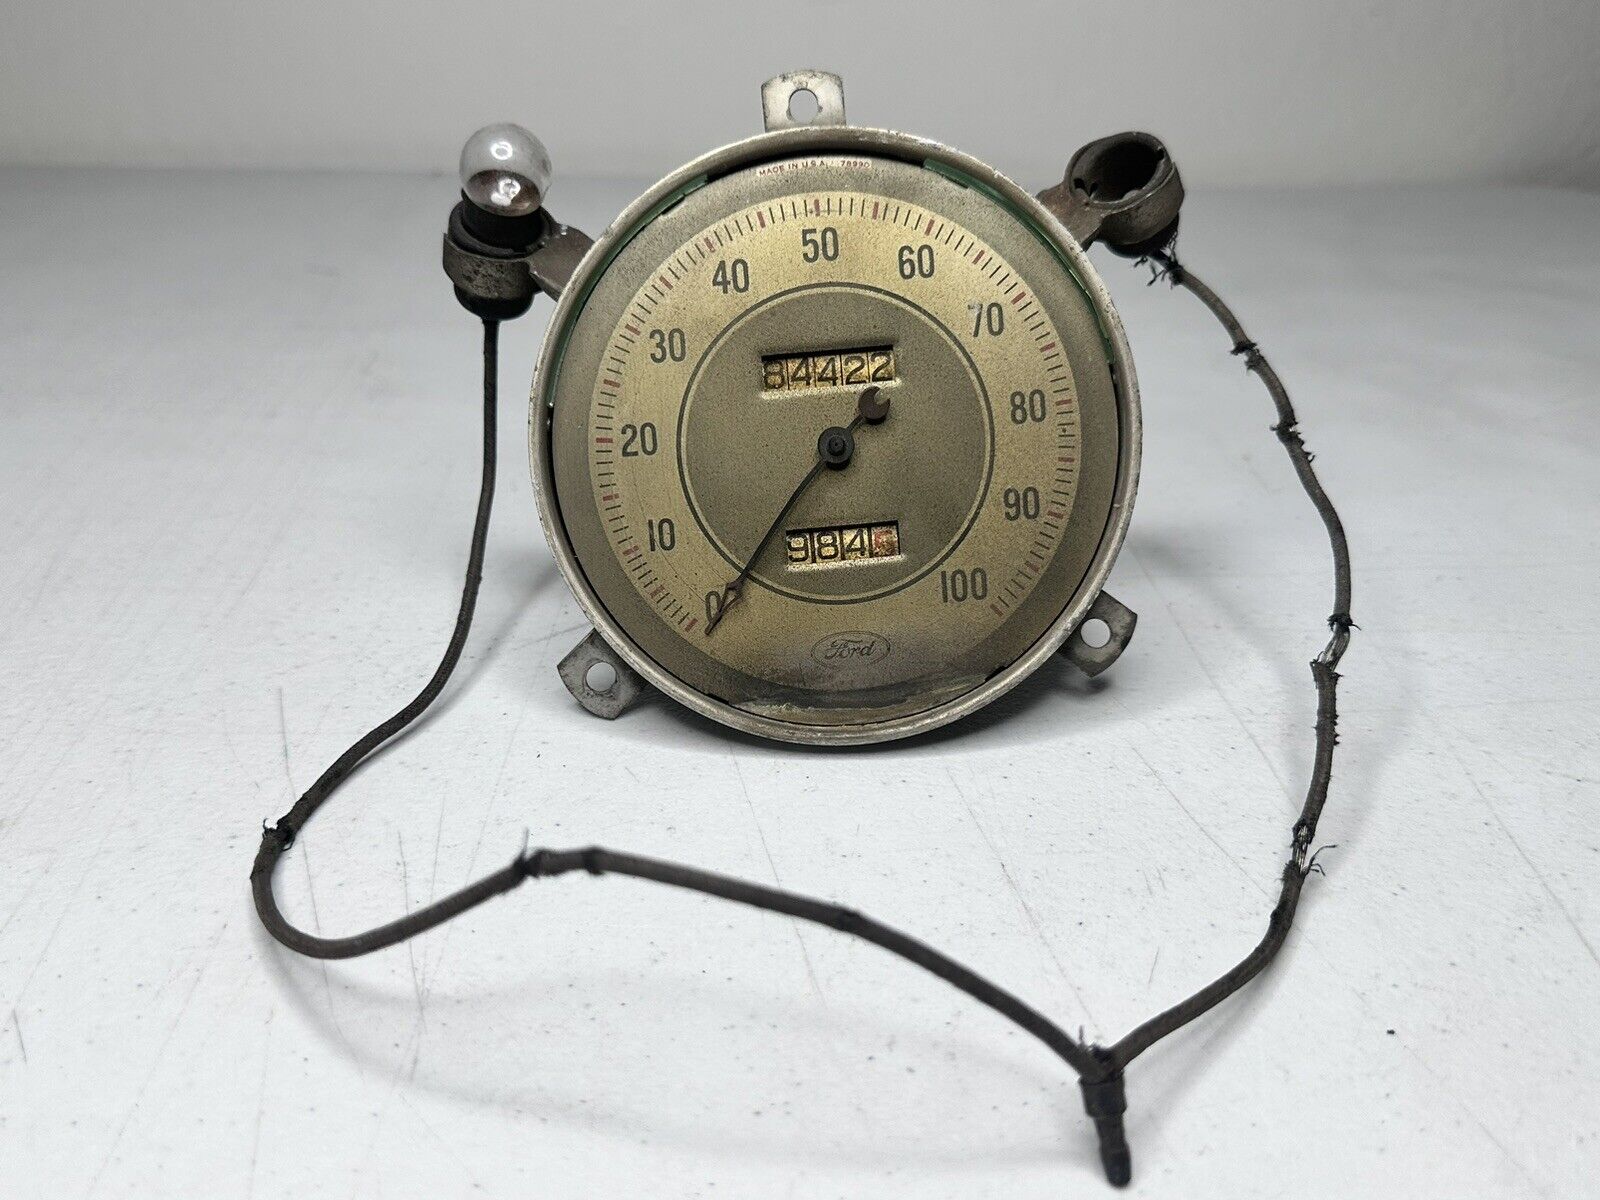 Vintage 1930s Ford Speedometer - Authentic Classic Car Part for Restoration